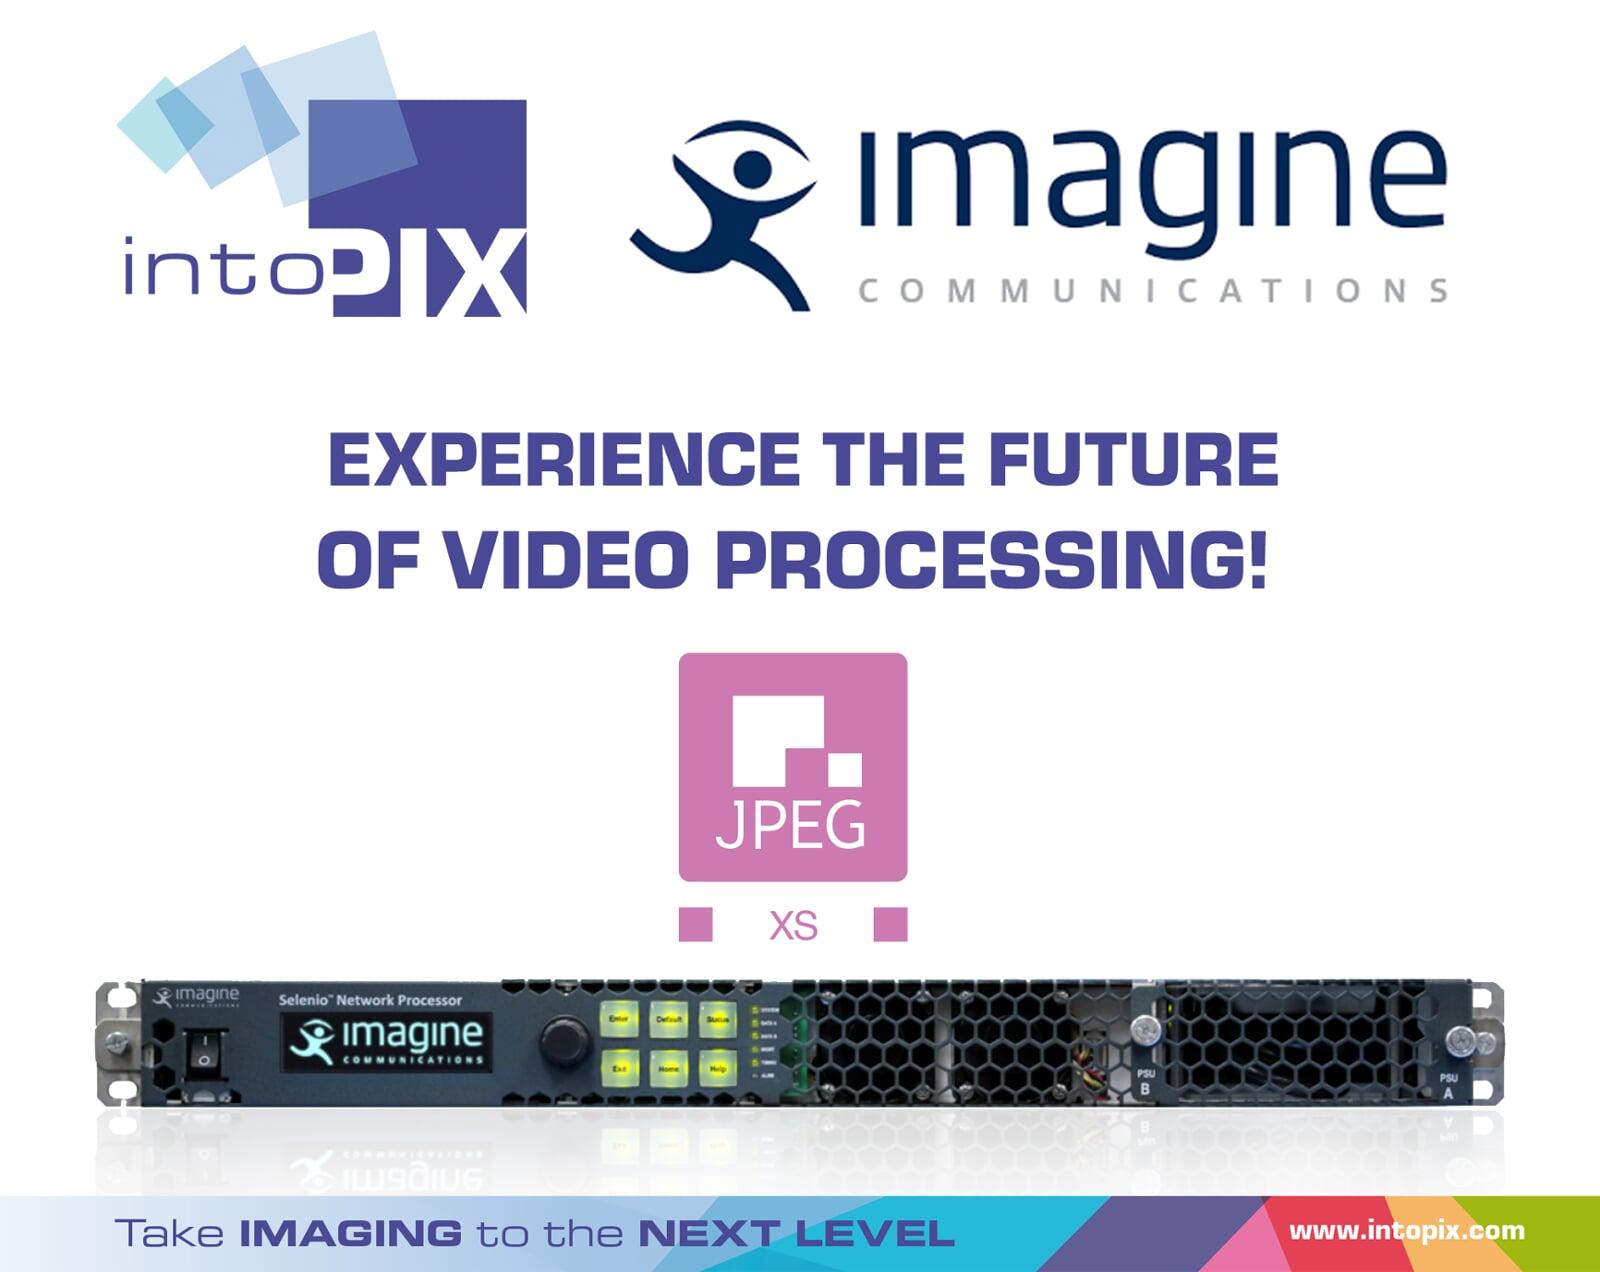 Experience the Future of Video Processing with intoPIX and Imagine Communications at the 2023 NAB Show